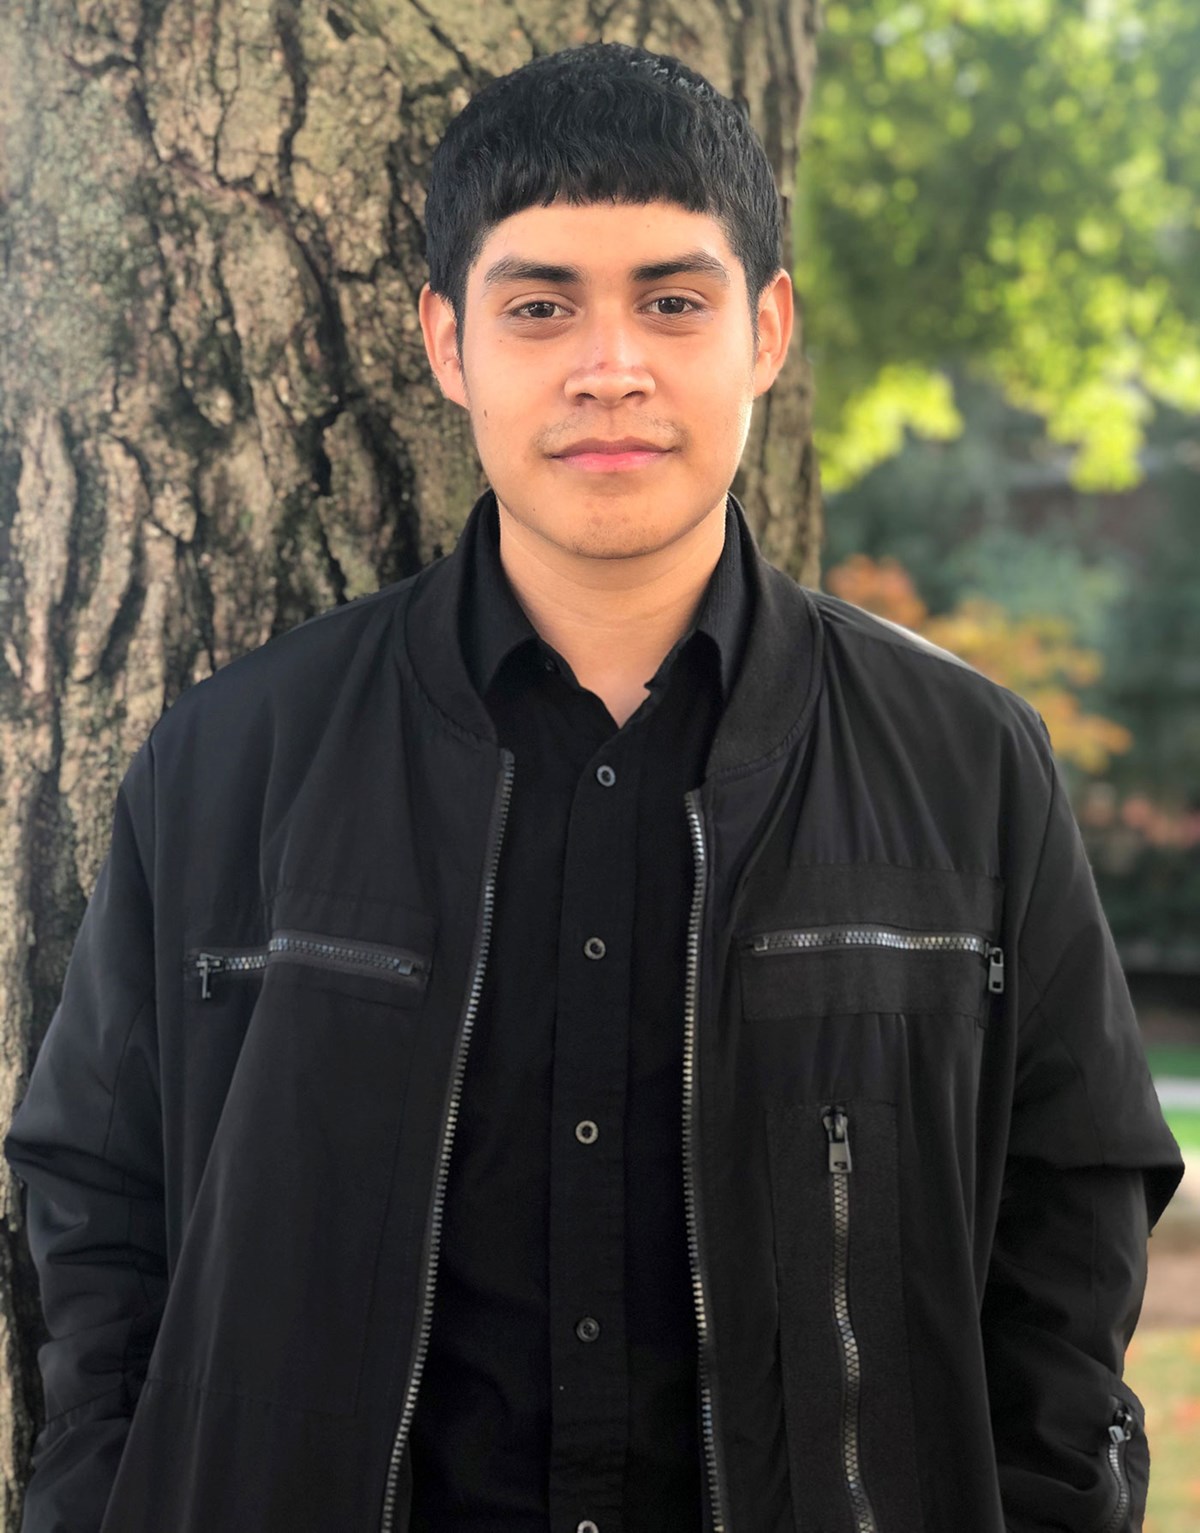 Edgardo Paz Juarez is a first-generation student majoring in Civil Engineering from Washington, D.C. He enjoys playing both music (piano, guitar, bass, and drums: he’s the whole band!) and soccer. He wants to pursue construction management.